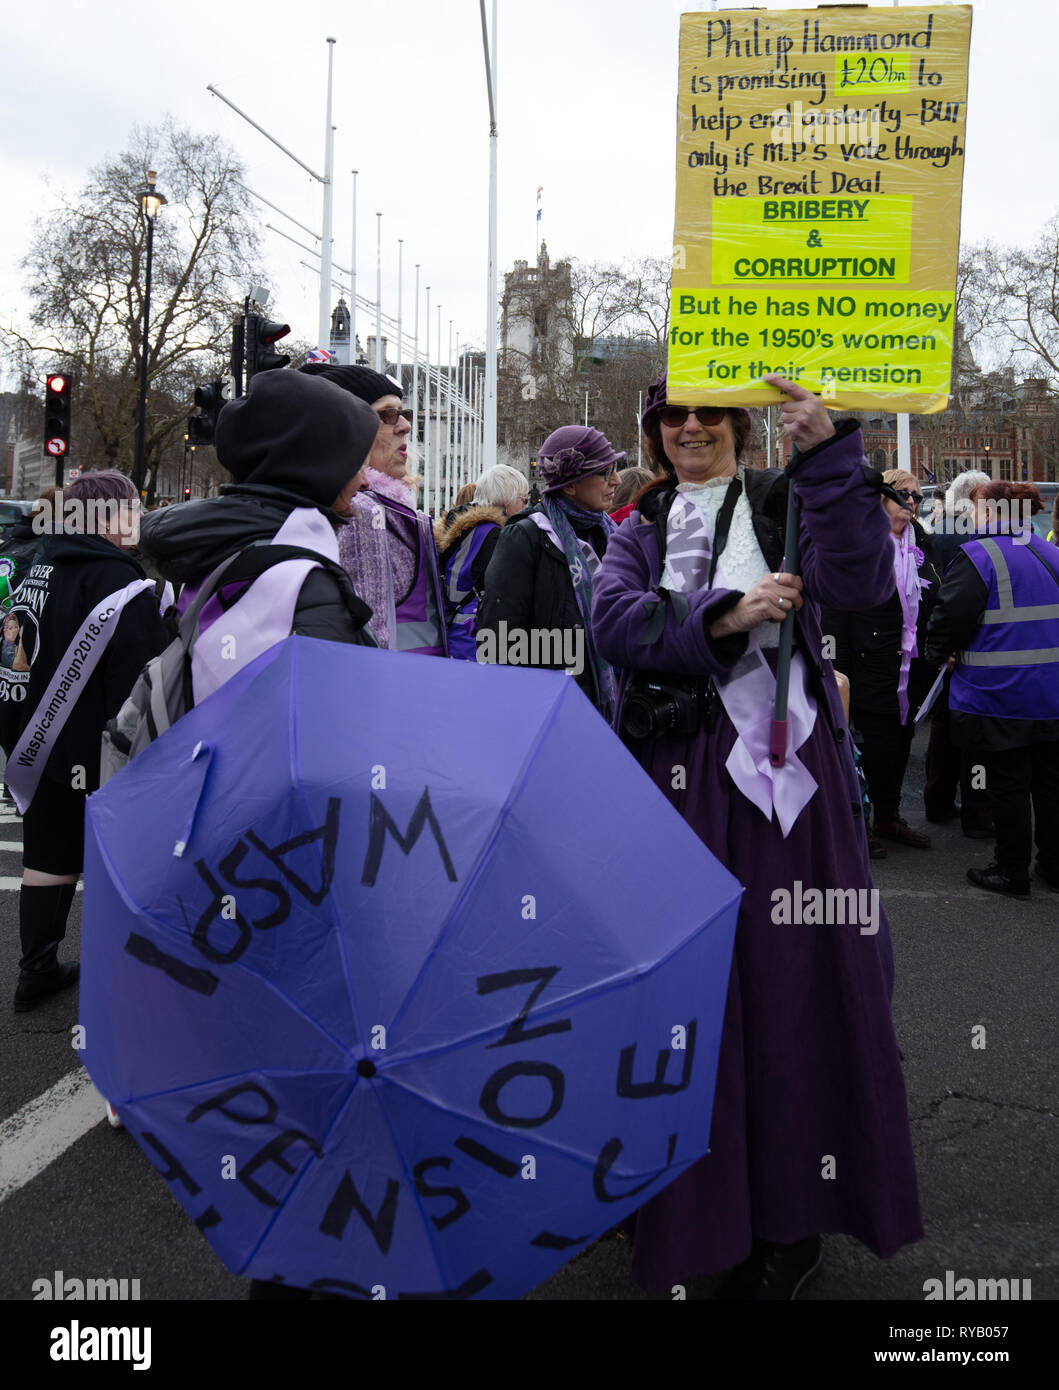 London, UK. 13th March 2019. Group of protesters of Solent WASPI (Women Against State Pension Inequality) campaign against unfair changes to State Pension Age imposed on women born in the 1950s near the Houses of Parliament, London, UK, today. Credit: Joe Kuis / Alamy Live News Stock Photo